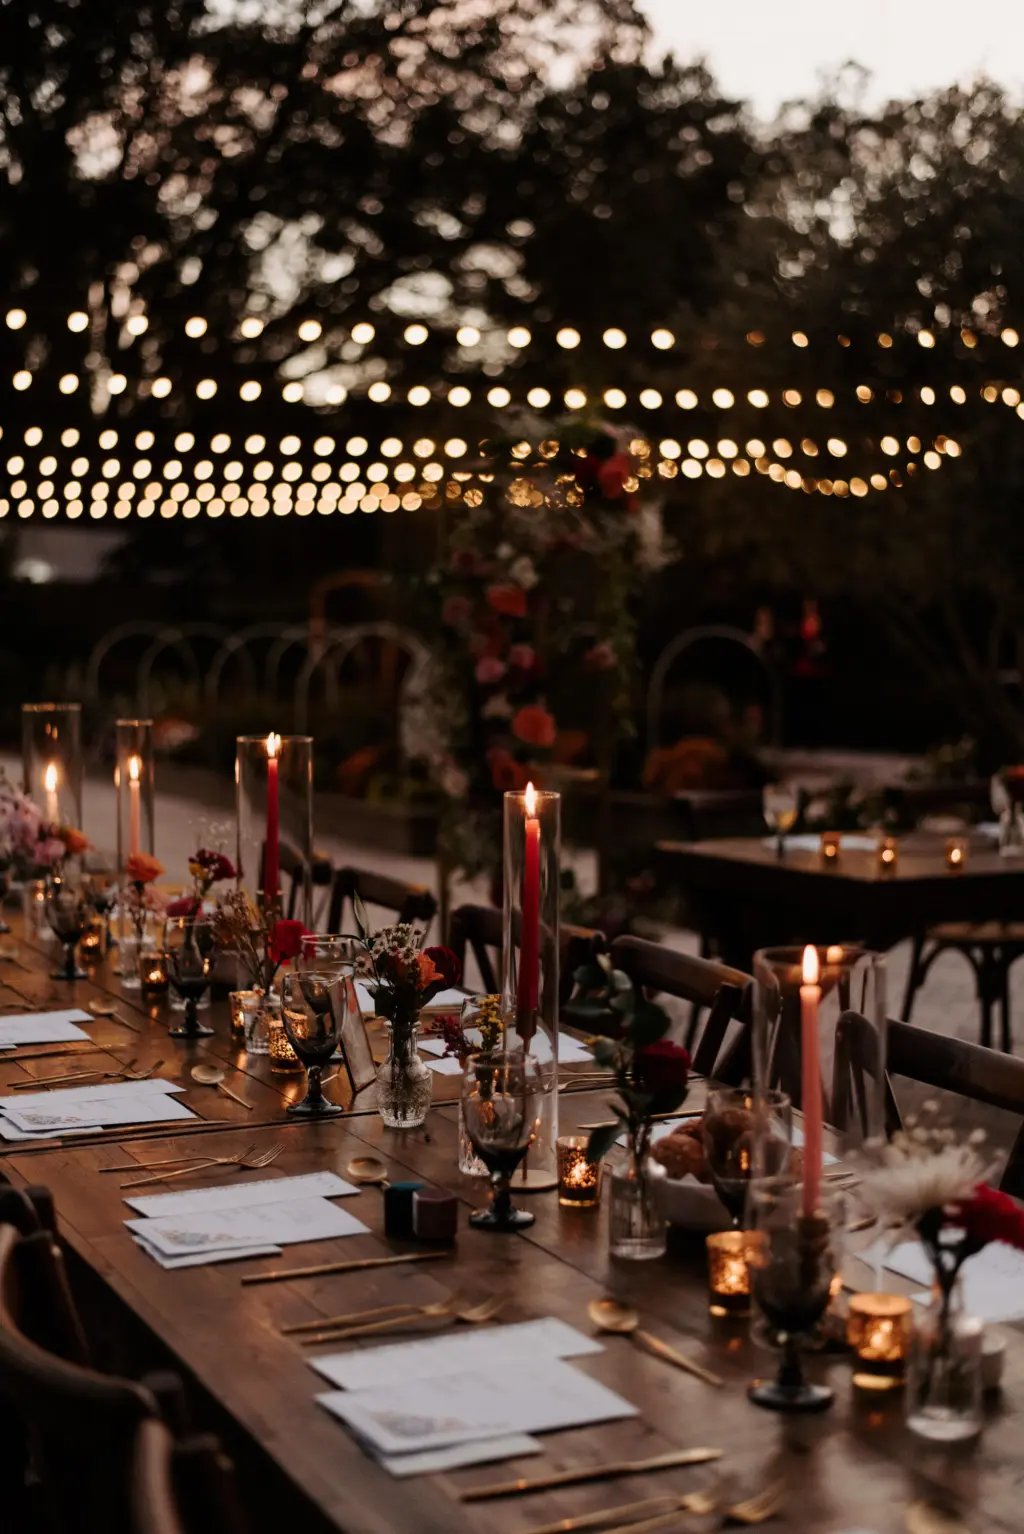 Garden Party Dark and Moody Wedding Reception with Bistro Lights and Tapered Candles Tablescape Decor | Tampa Wedding Venue Mill Pond Estate | Planner Tampa Stephany Perry Events | Caterer Elite Event Catering